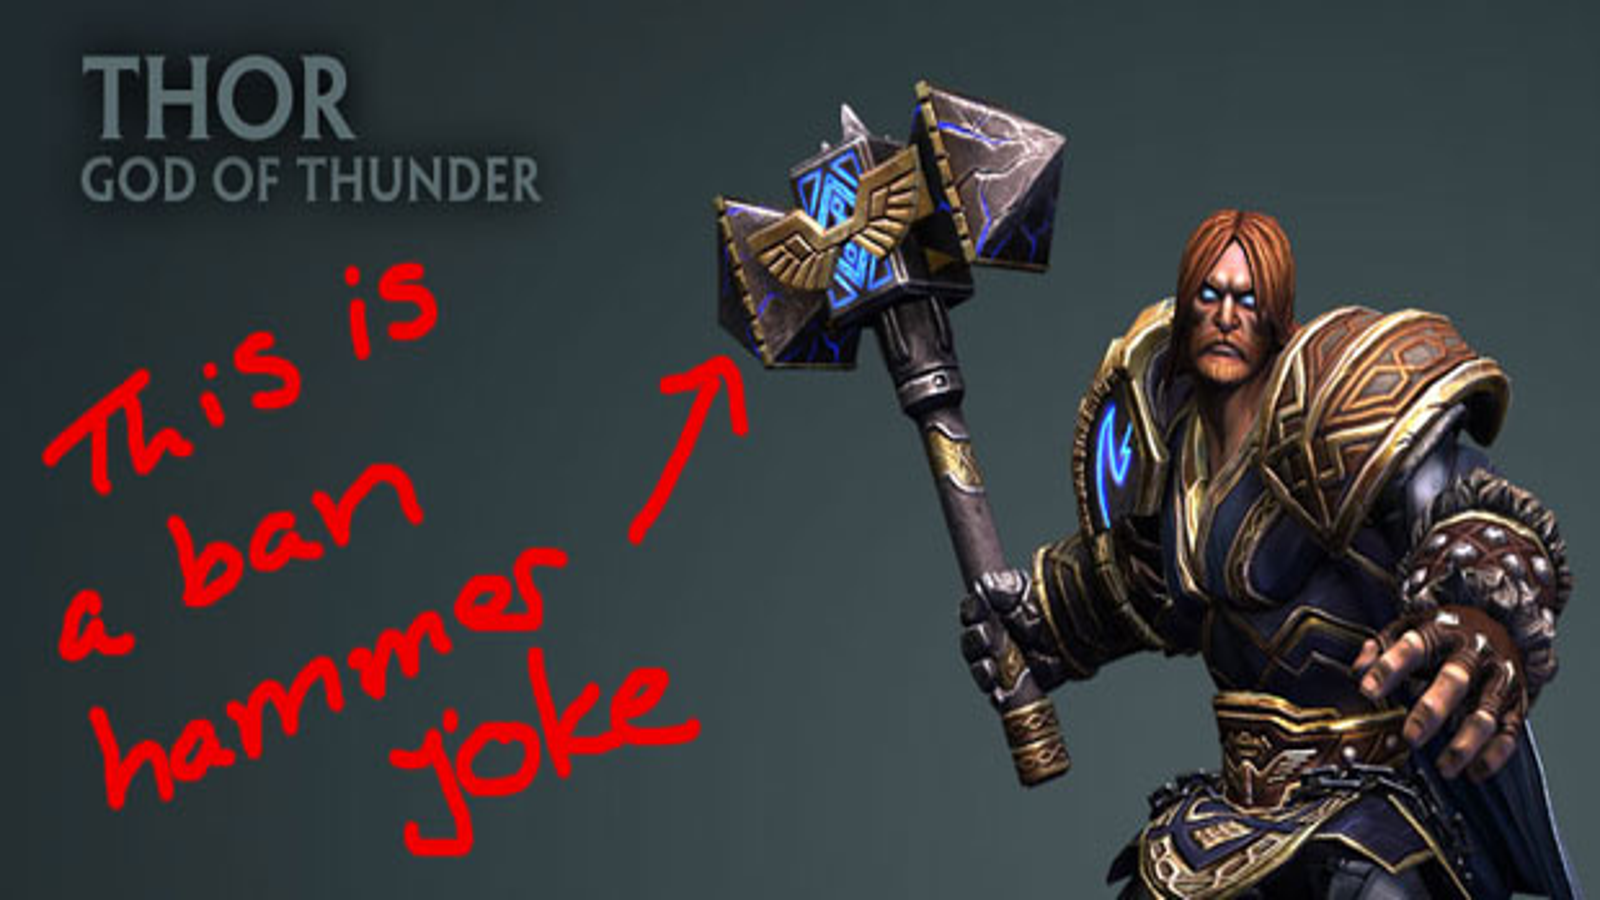 How To Get The SMITE HAMMER!